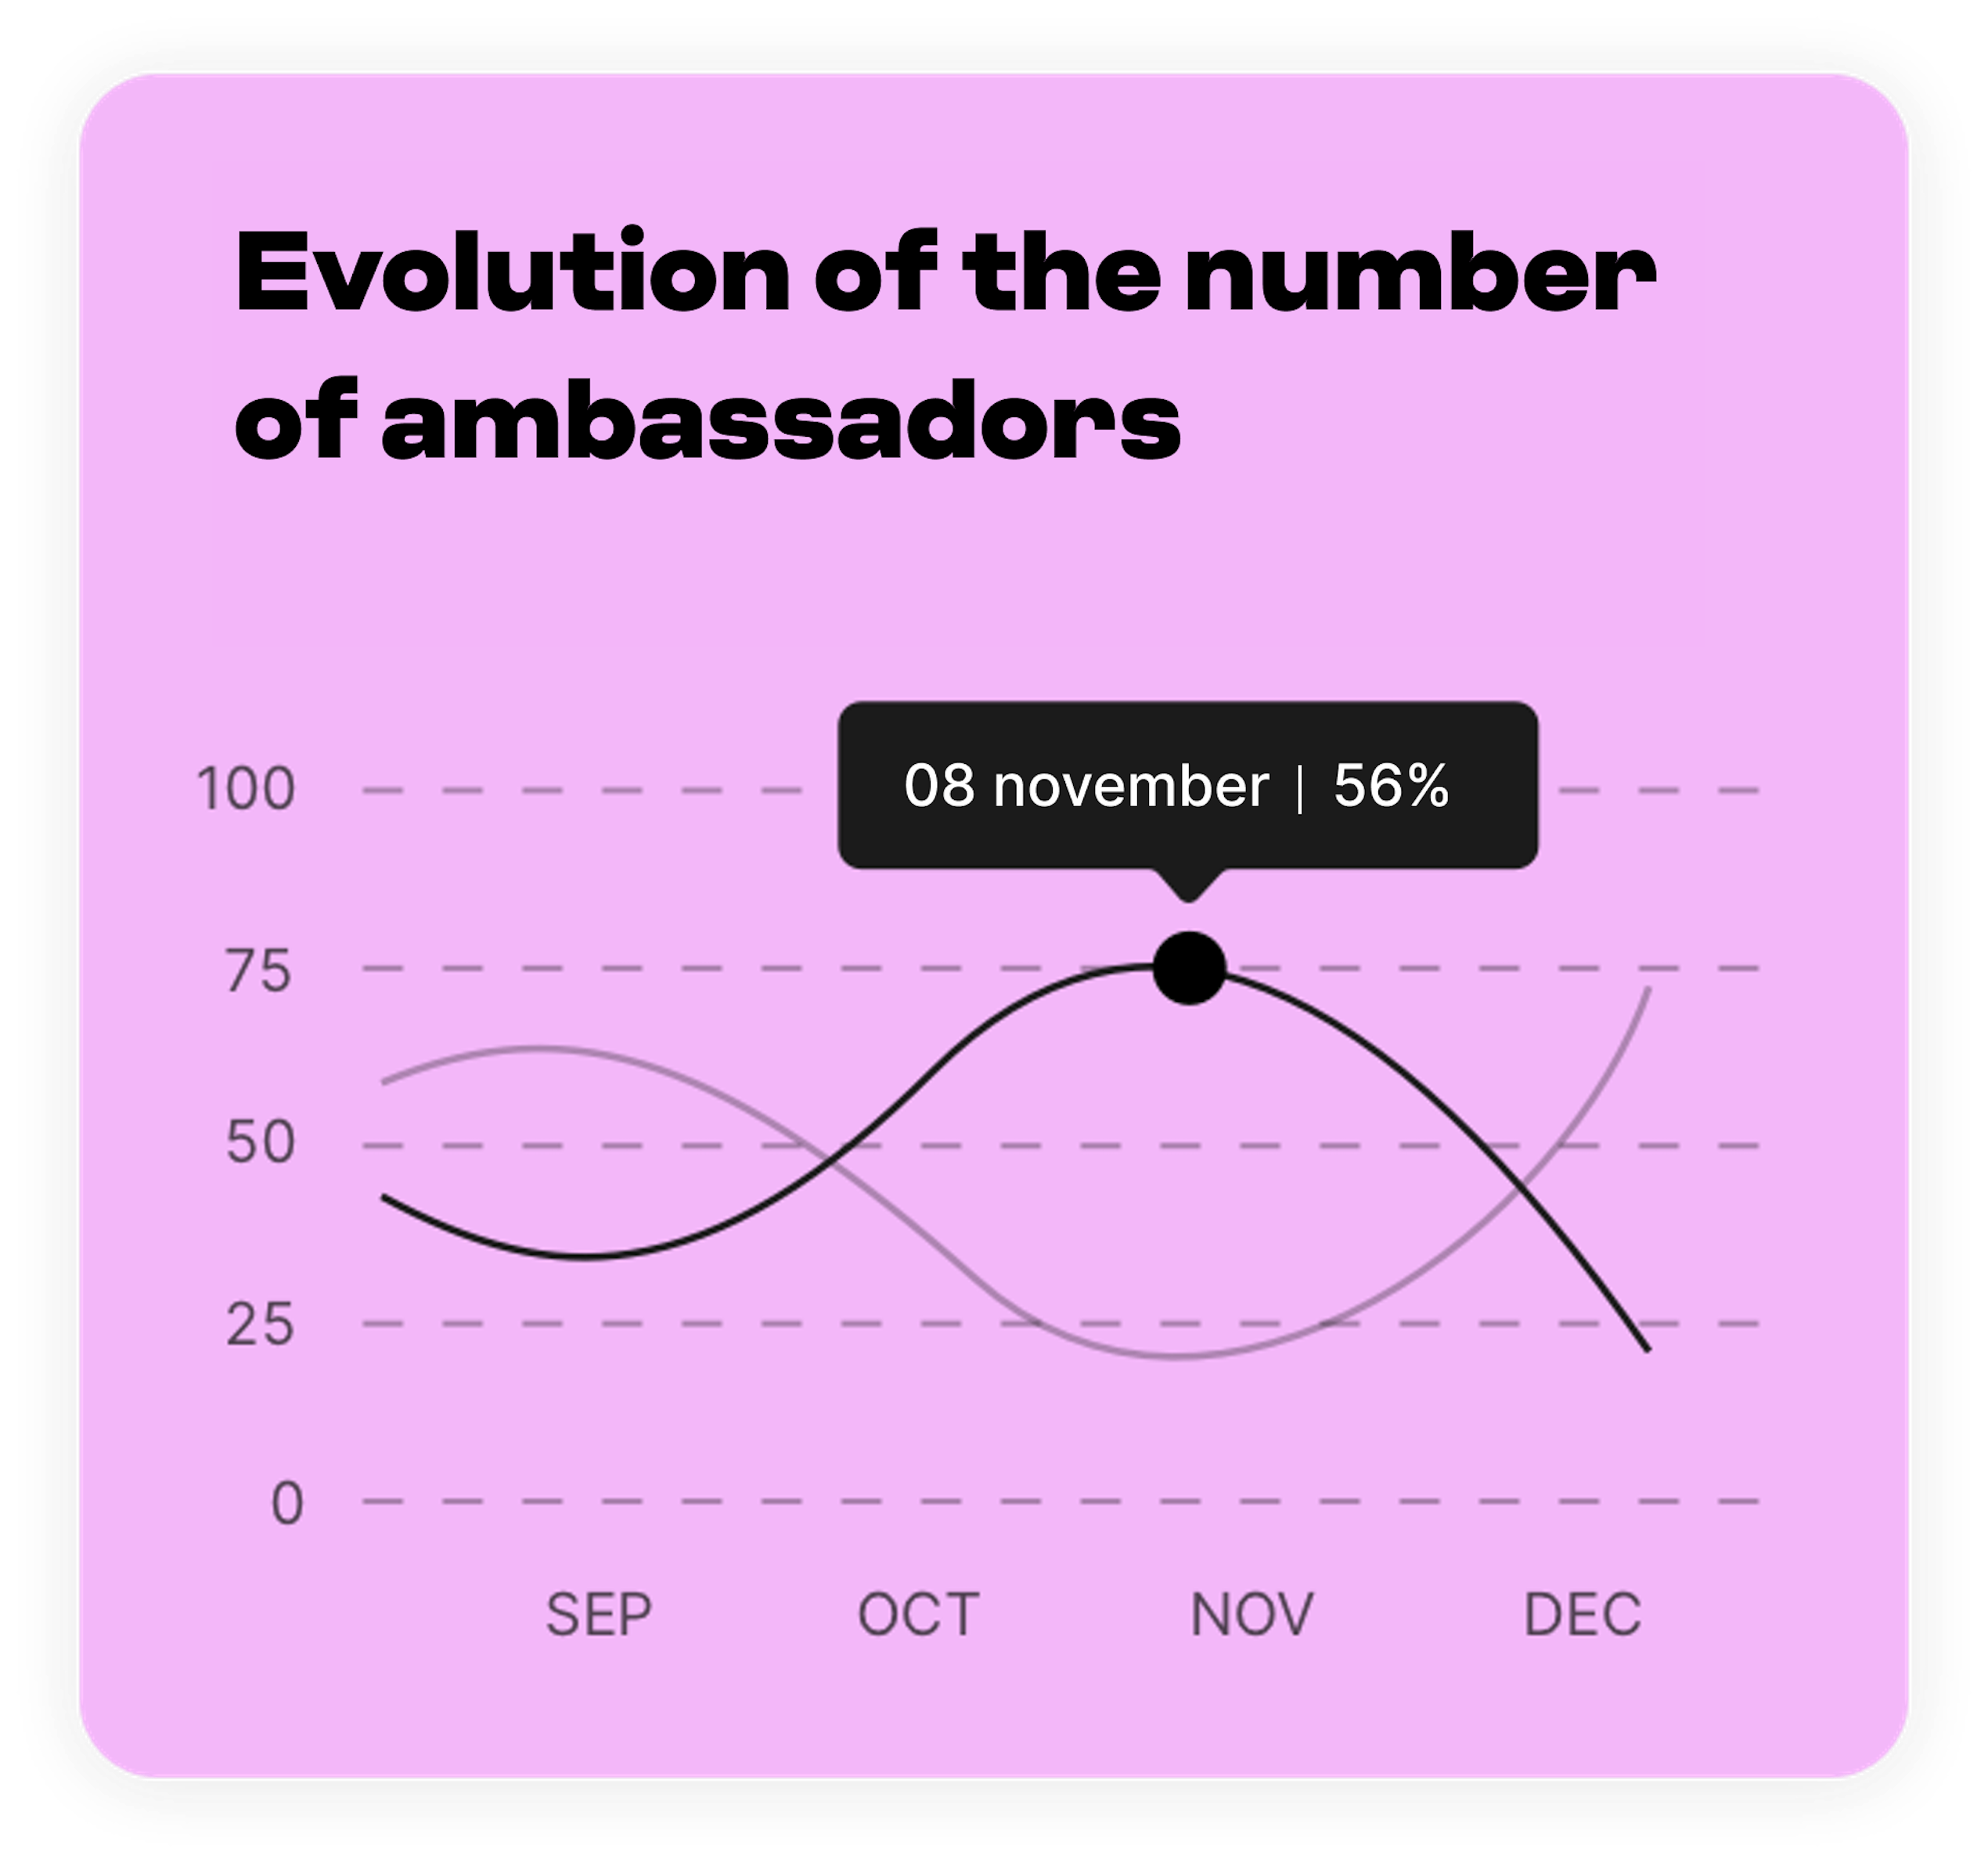 Make your employees ambassadors of your employer brand